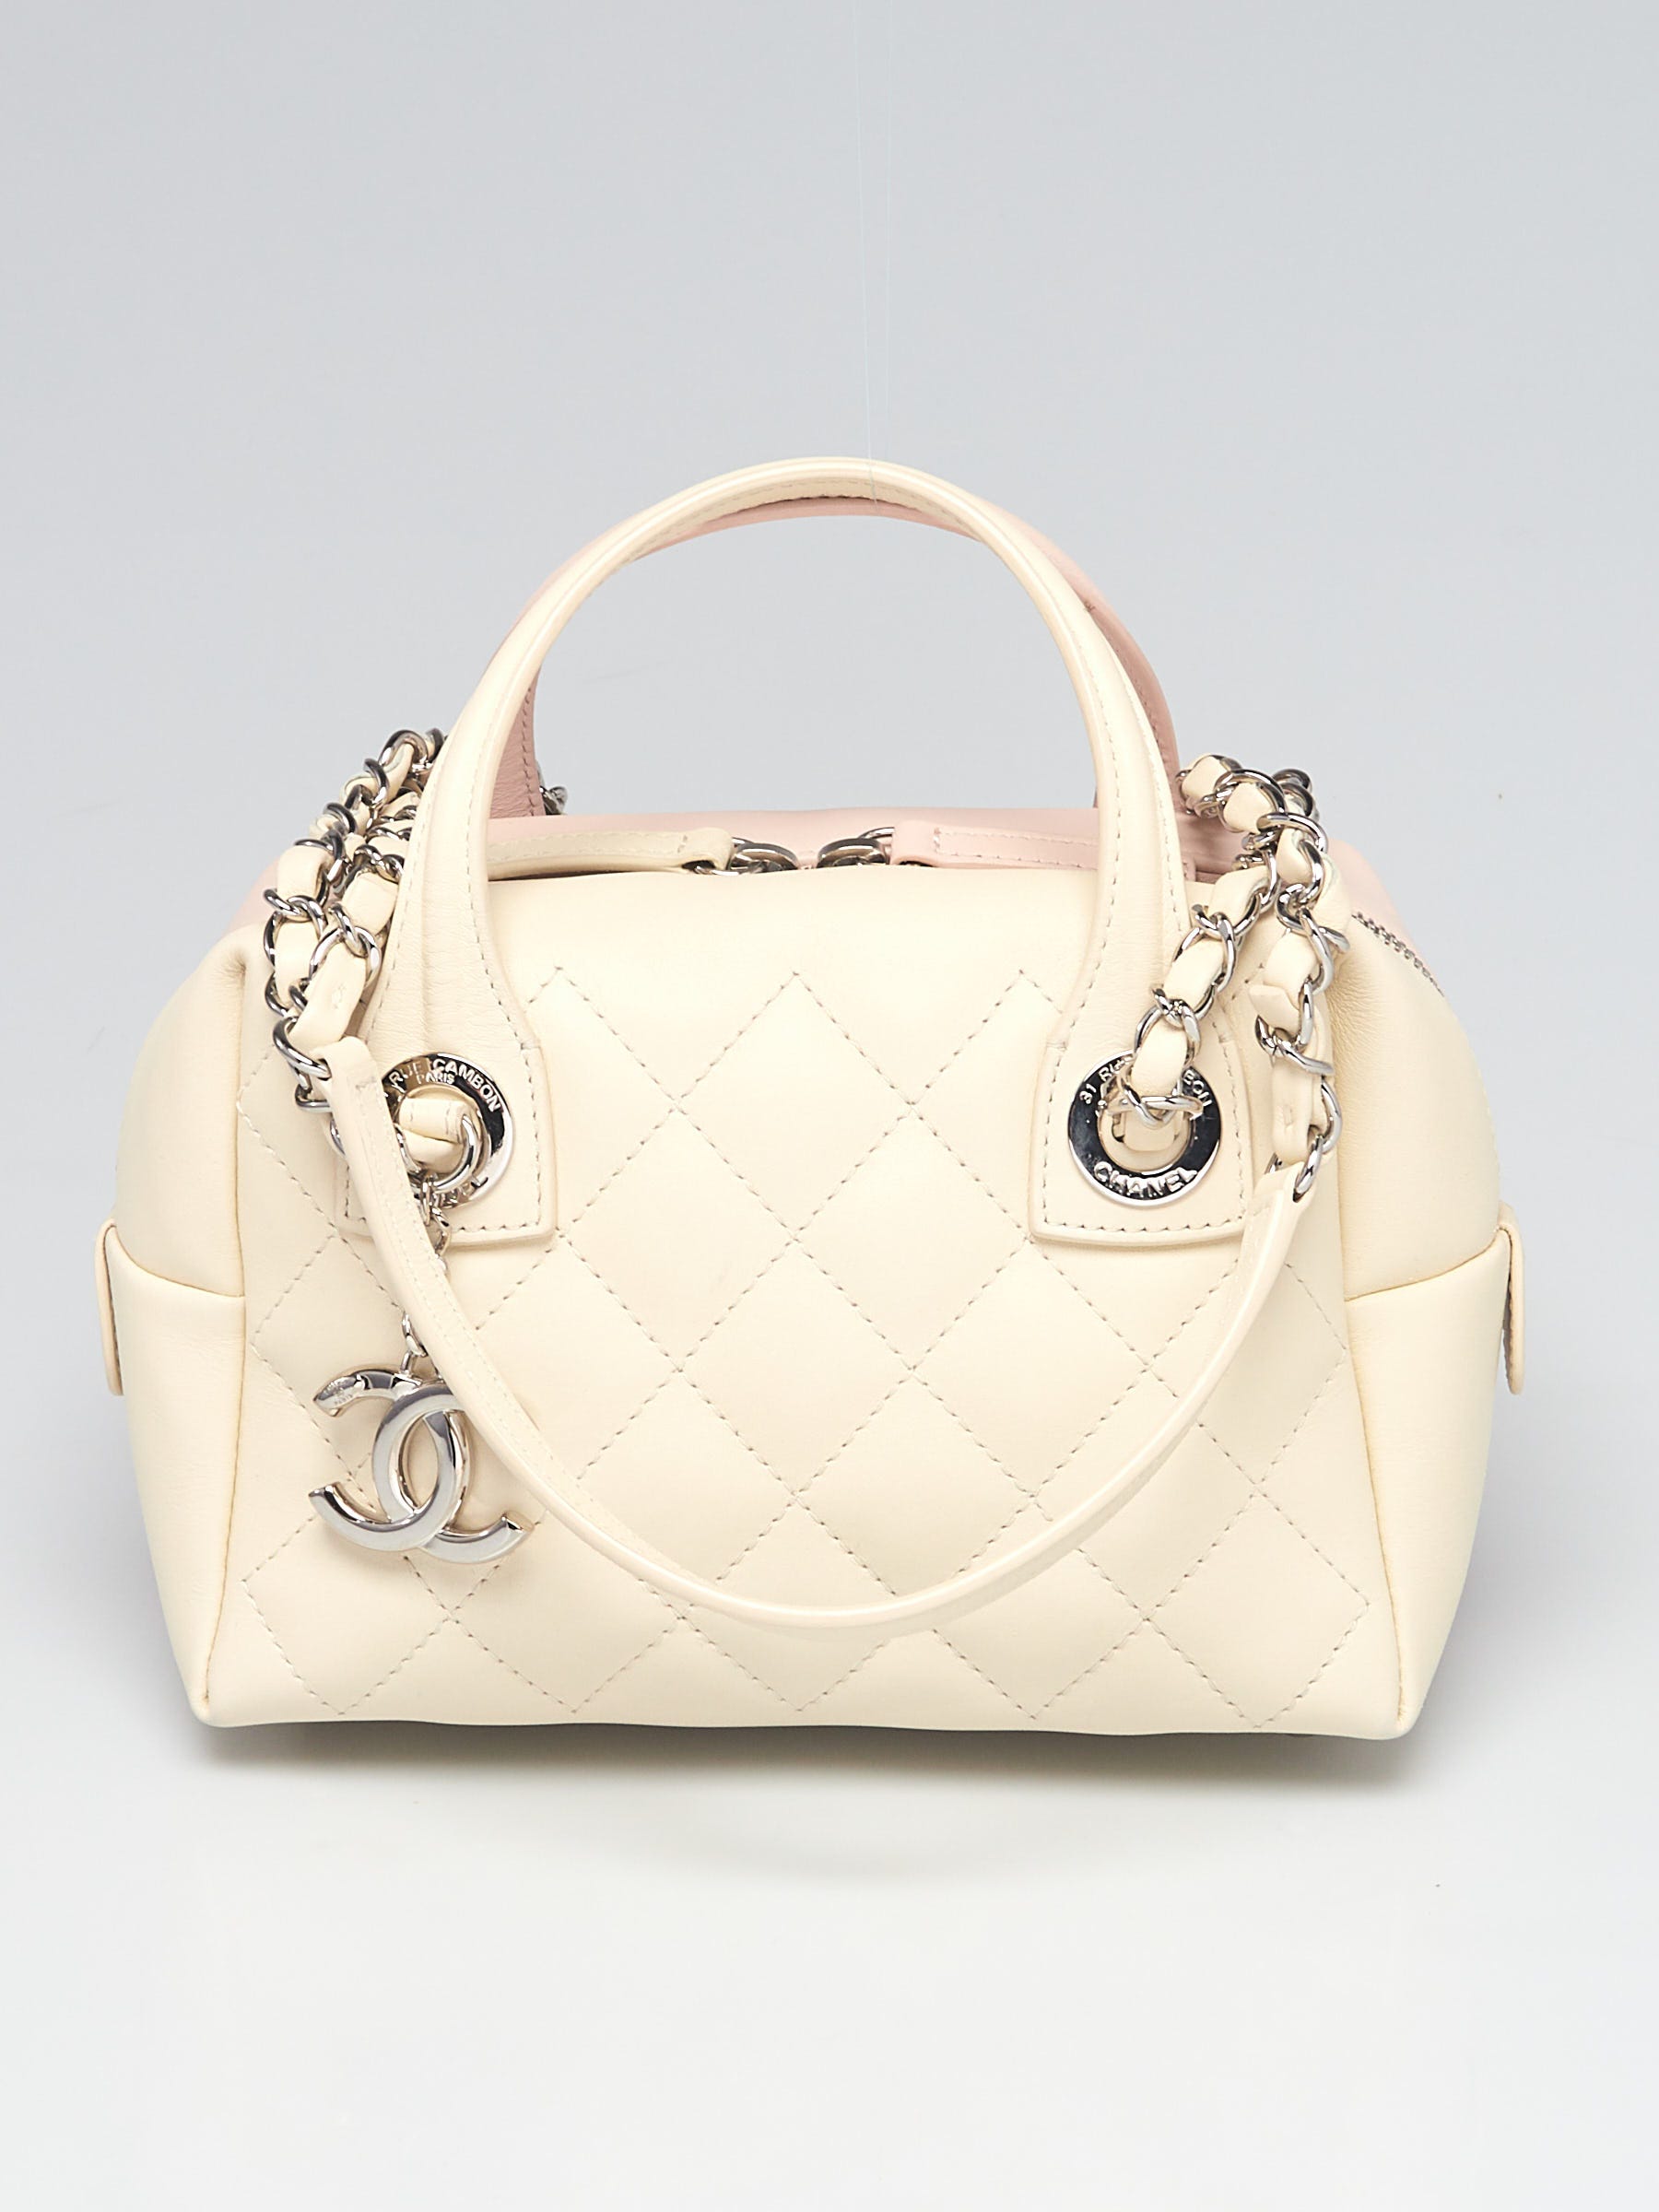 Chanel PinkIvory Quilted Calfskin Leather Featherweight Mini Bowling Bag   Yoogis Closet